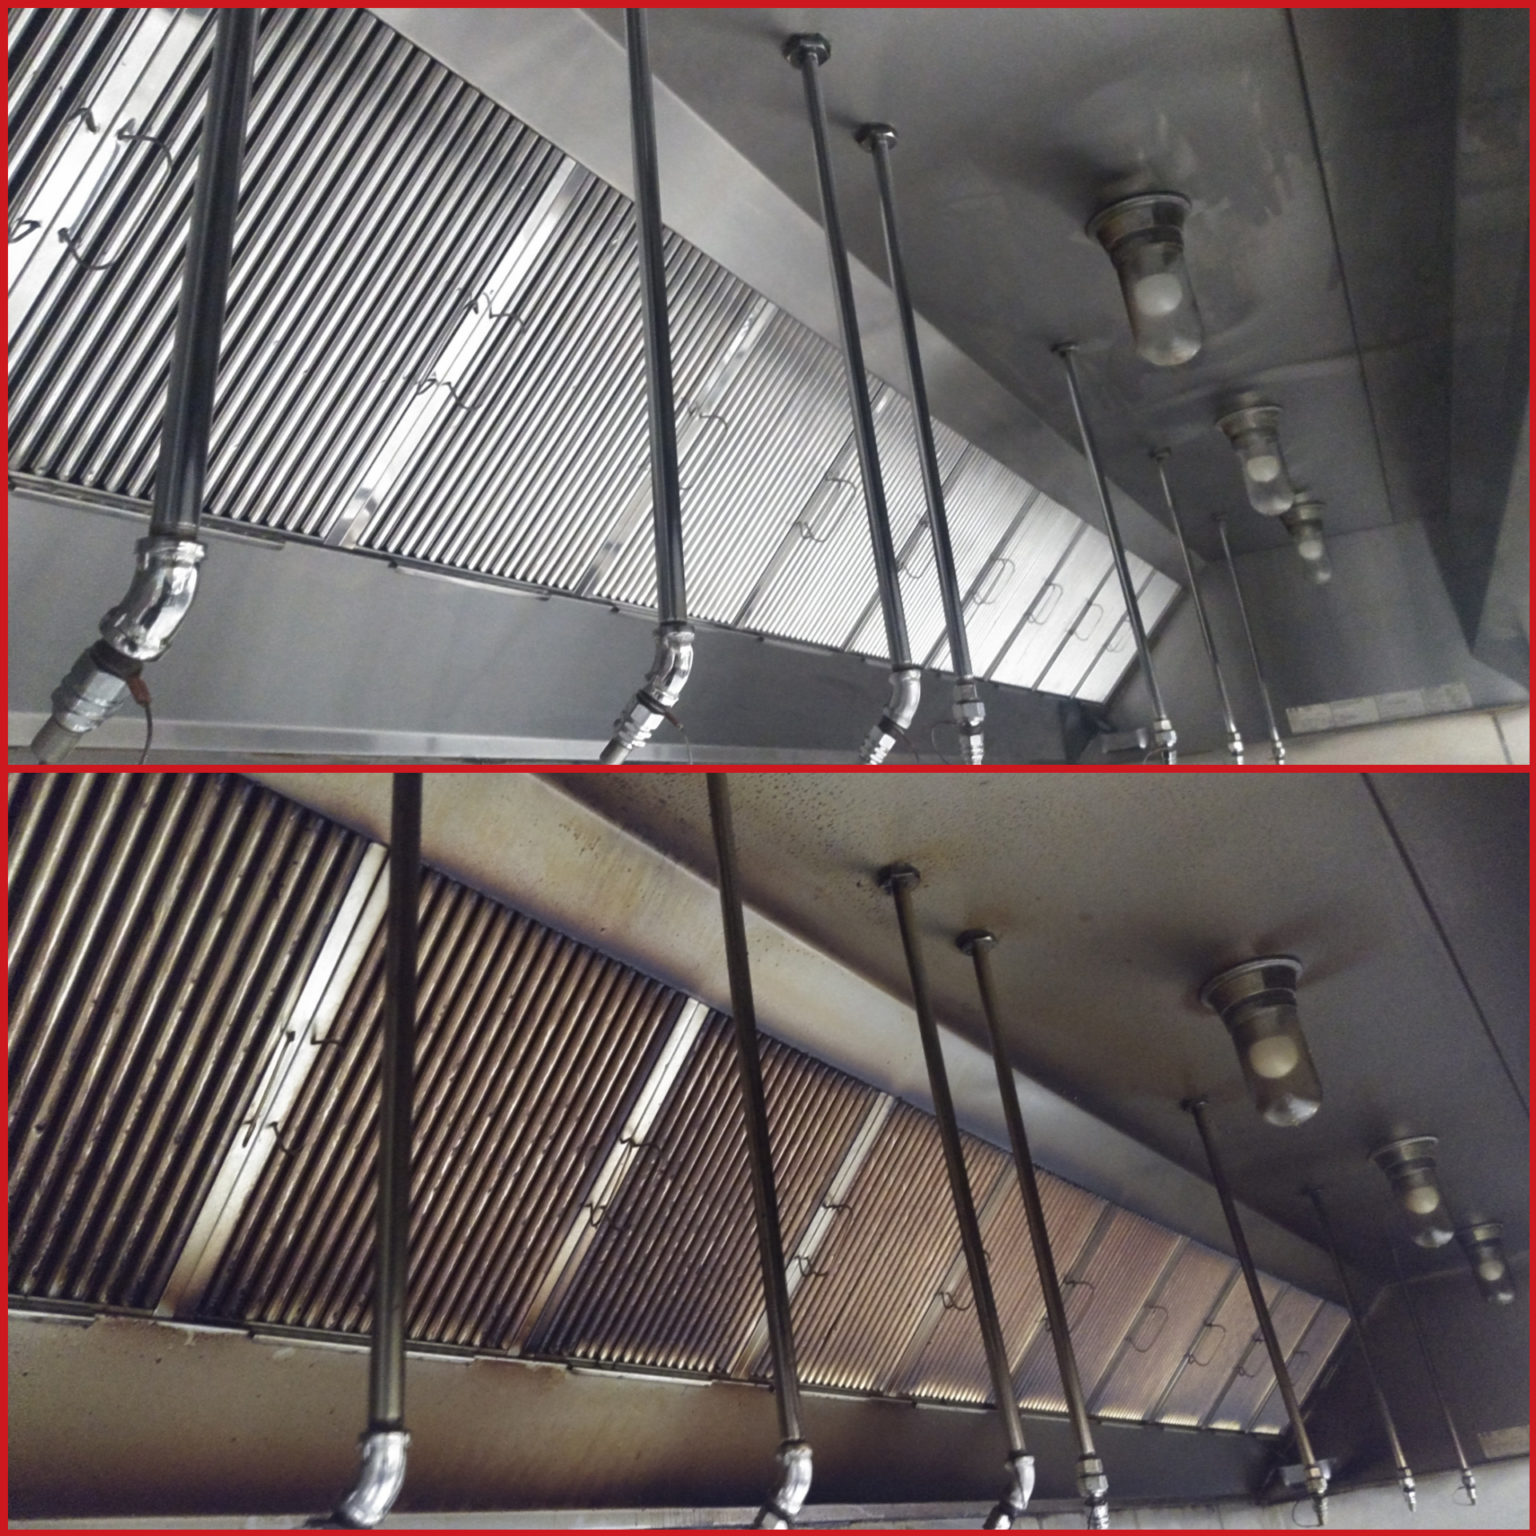 Hood Filter/ Vent Cleaning Options for Restaurants